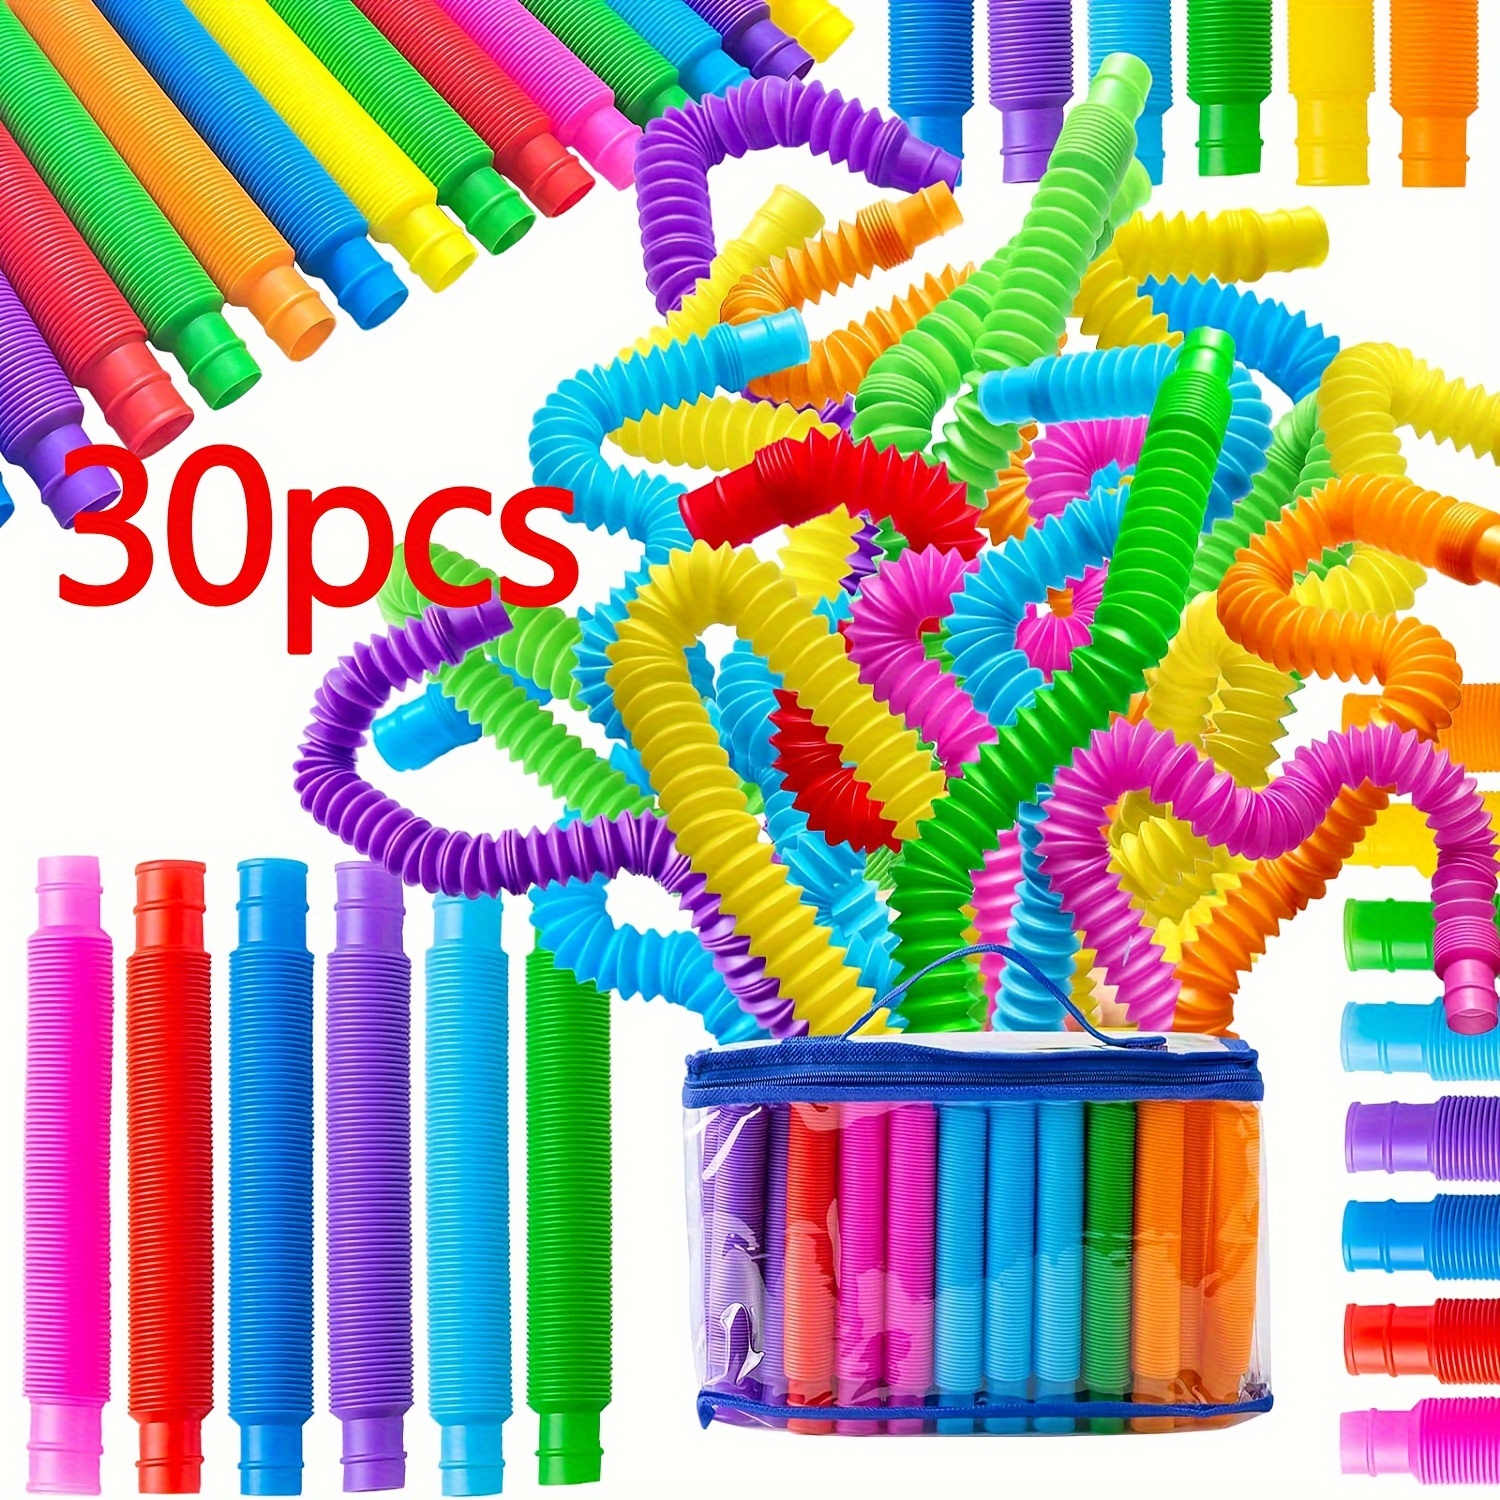 

30pcs Pop Tubes Bring Fun, Imagination, And Creative Learning To Children's Sensory Toy, Multiple Gameplay Methods For Connecting, Stretching, Twisting, And Trendy (random Colors)